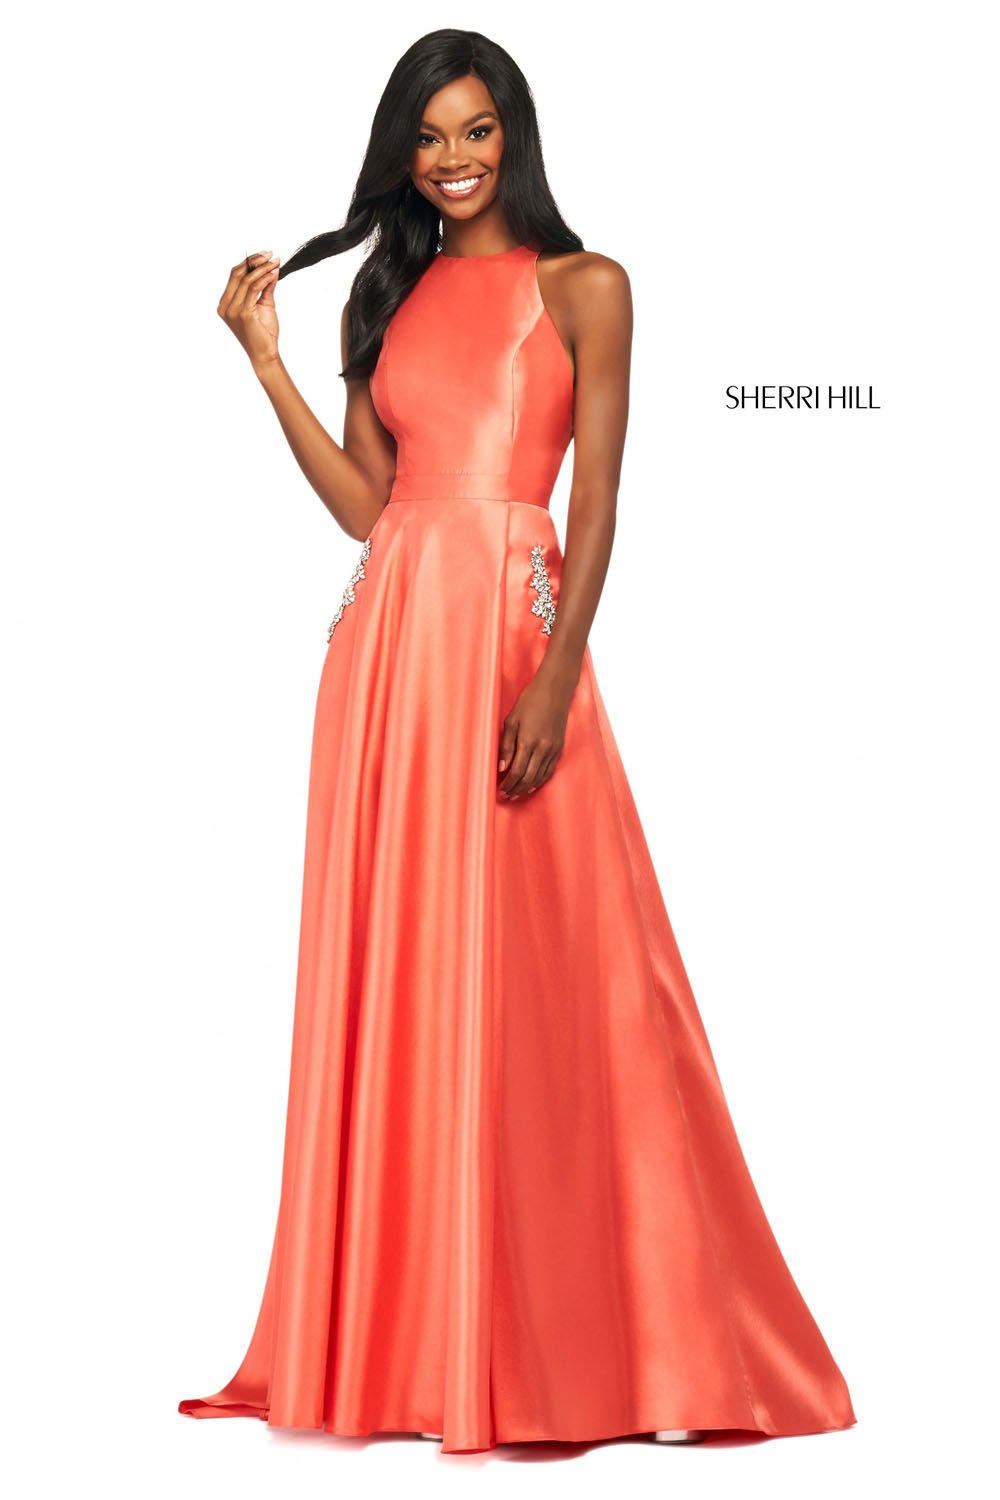 Sherri Hill 53529 dress images in these colors: Yellow, Mocha, Candy Pink, Black, Lilac, Red, Light Blue, Coral, Blush, Ivory, Navy.